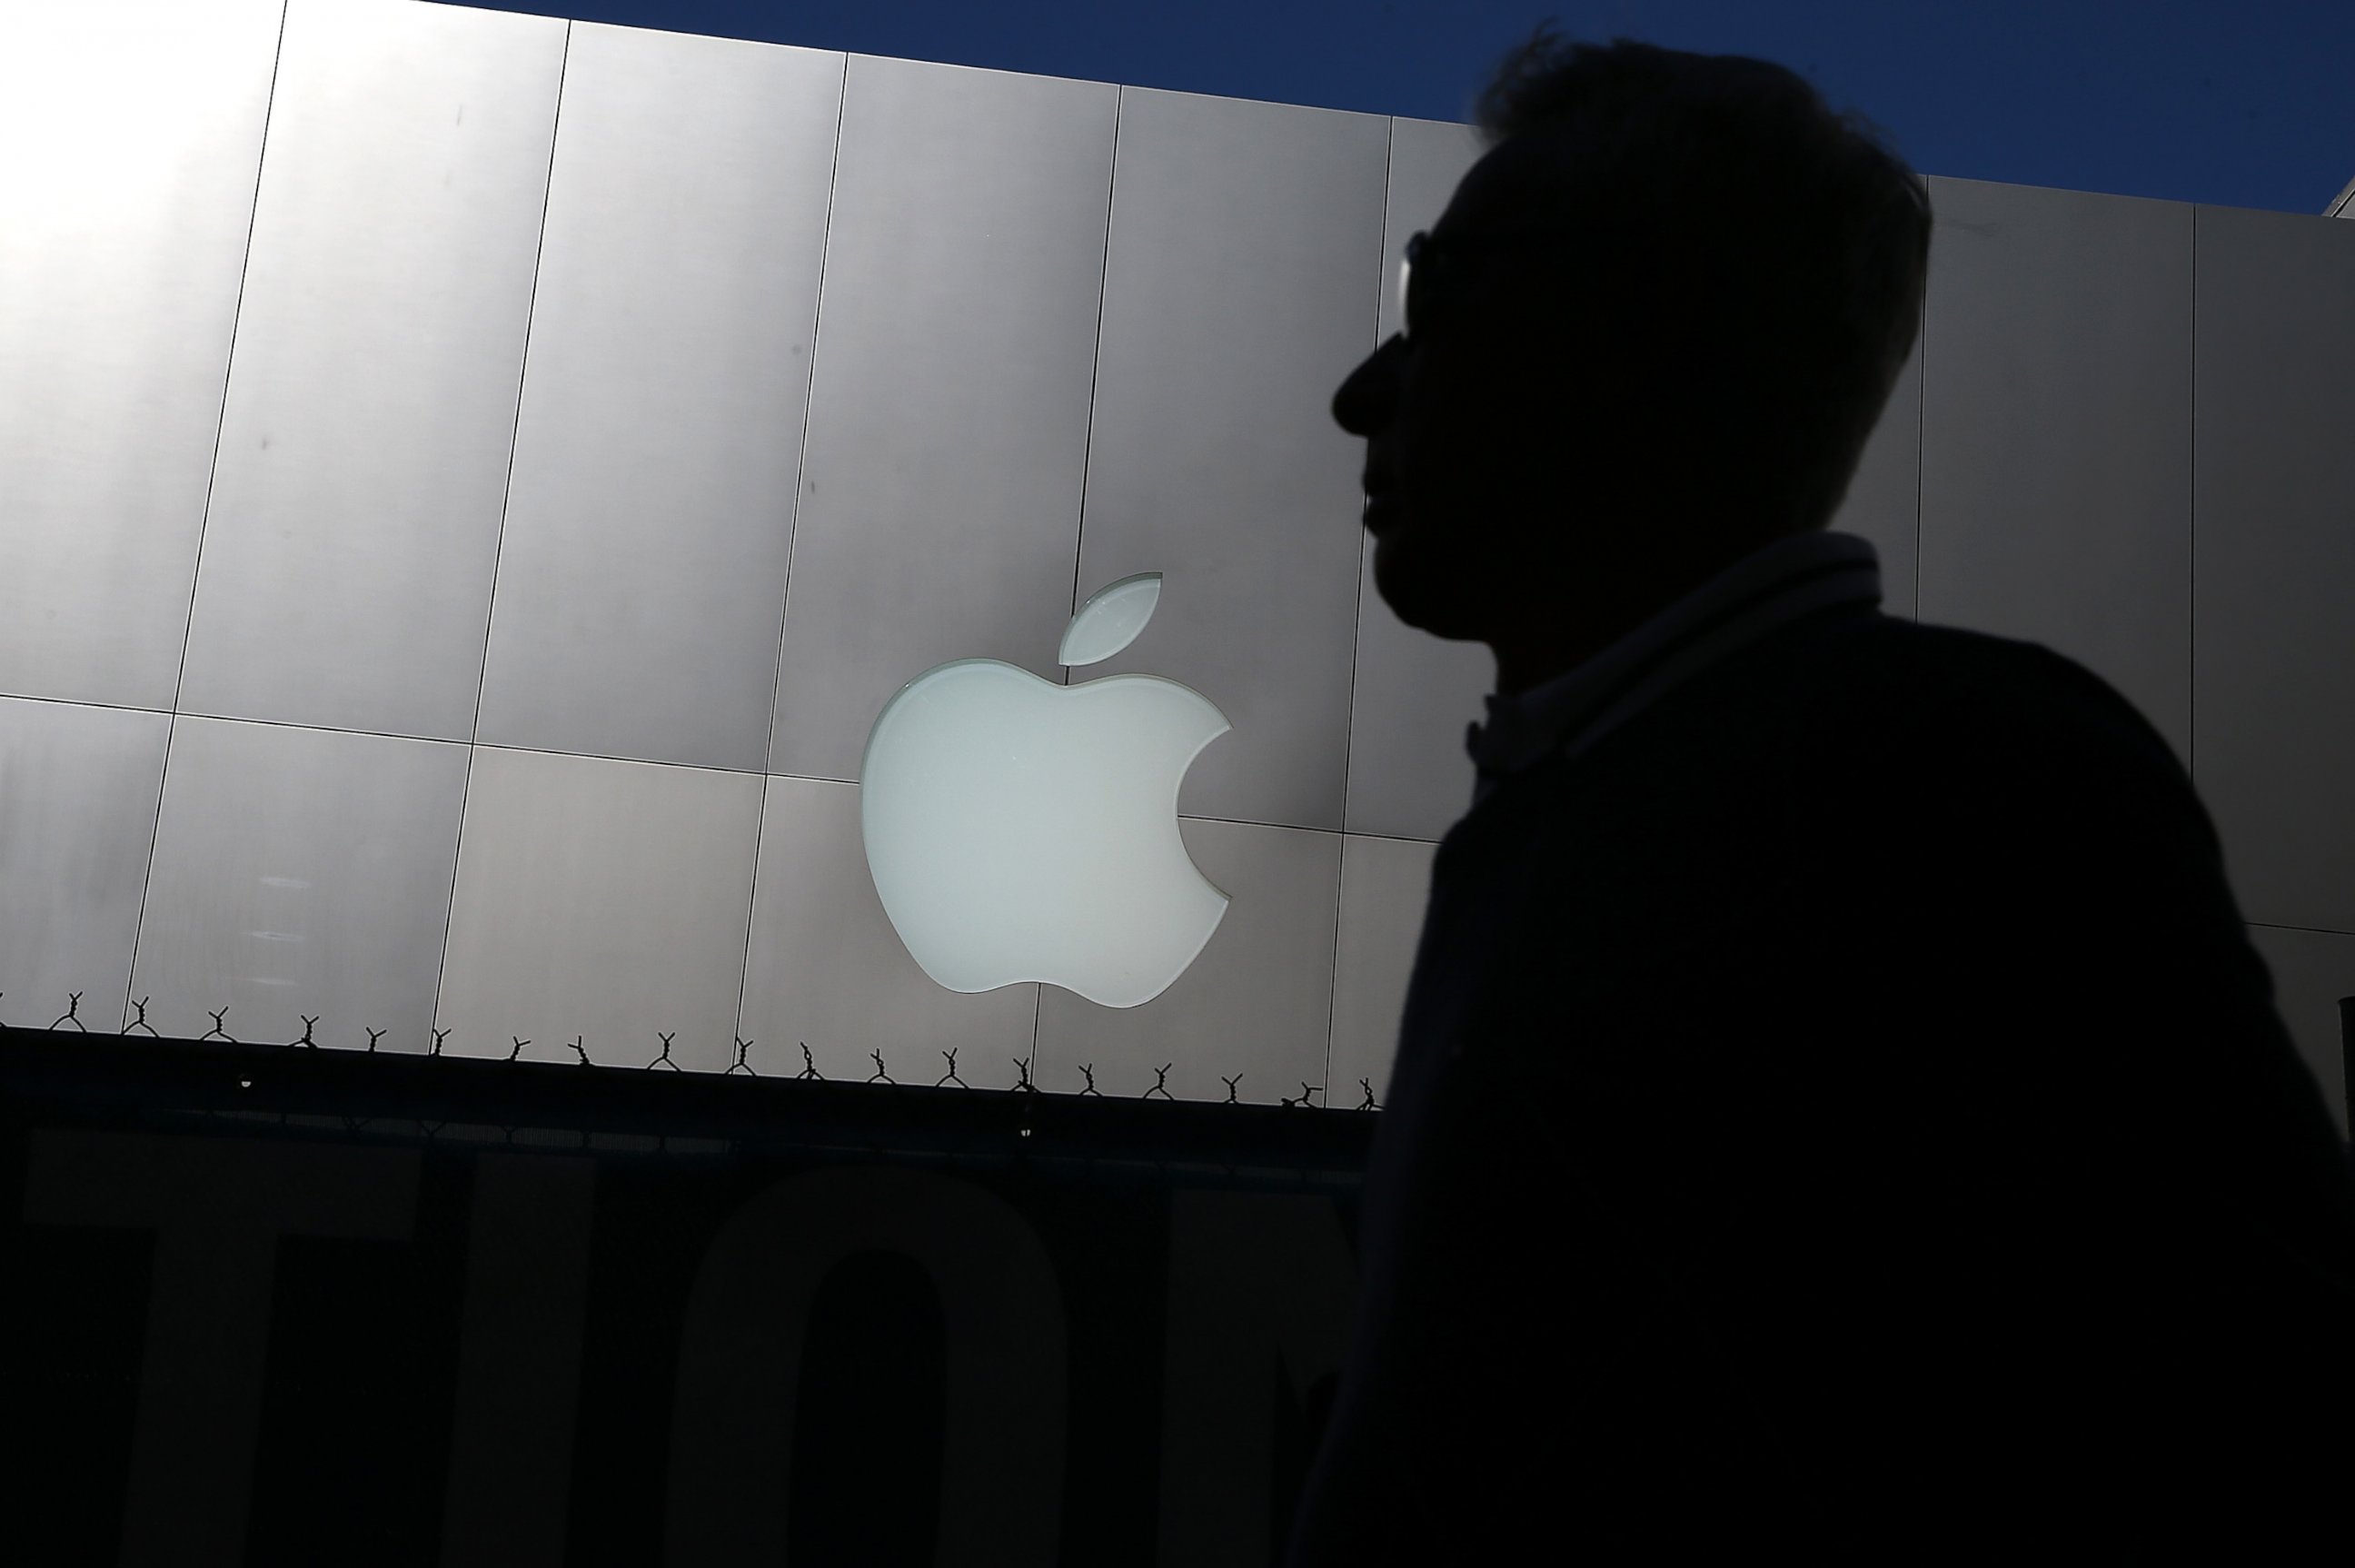 PHOTO: A person walks by an Apple Store on April 23, 2013 in San Francisco.